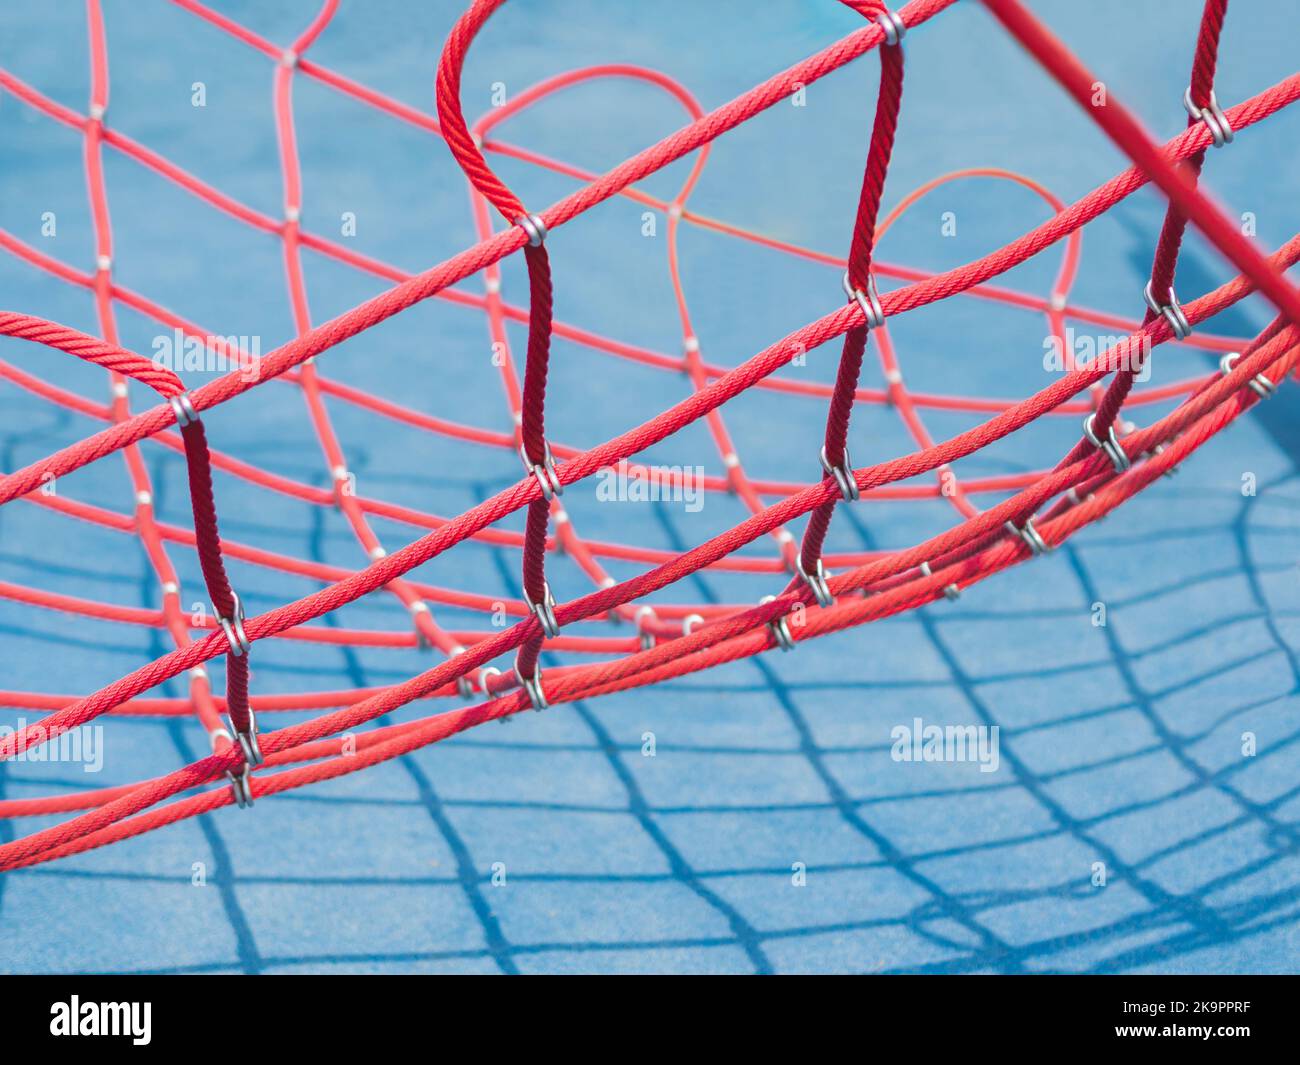 Red net on blue background. Sport equipment on public sportsground in sunny day. Geometrical shadows in sunny day. Stock Photo